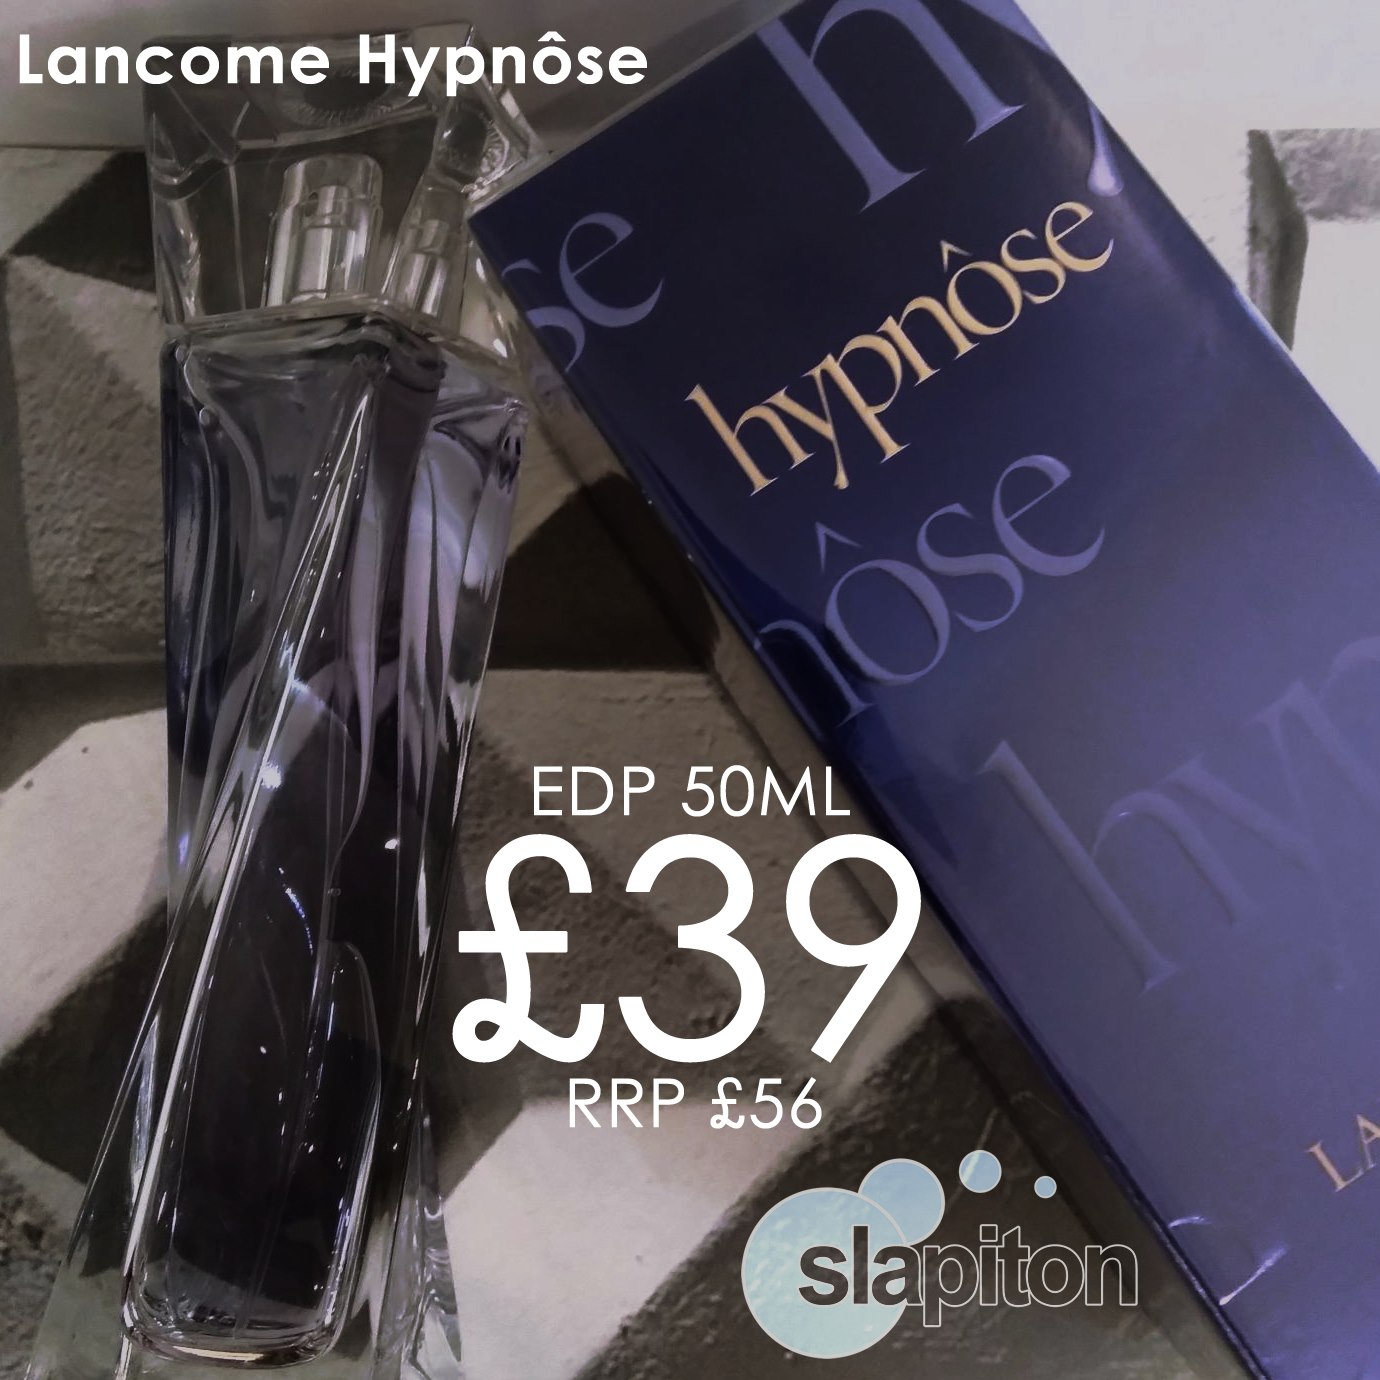 Special Offer on Lancome Hypnose EDP 50ml